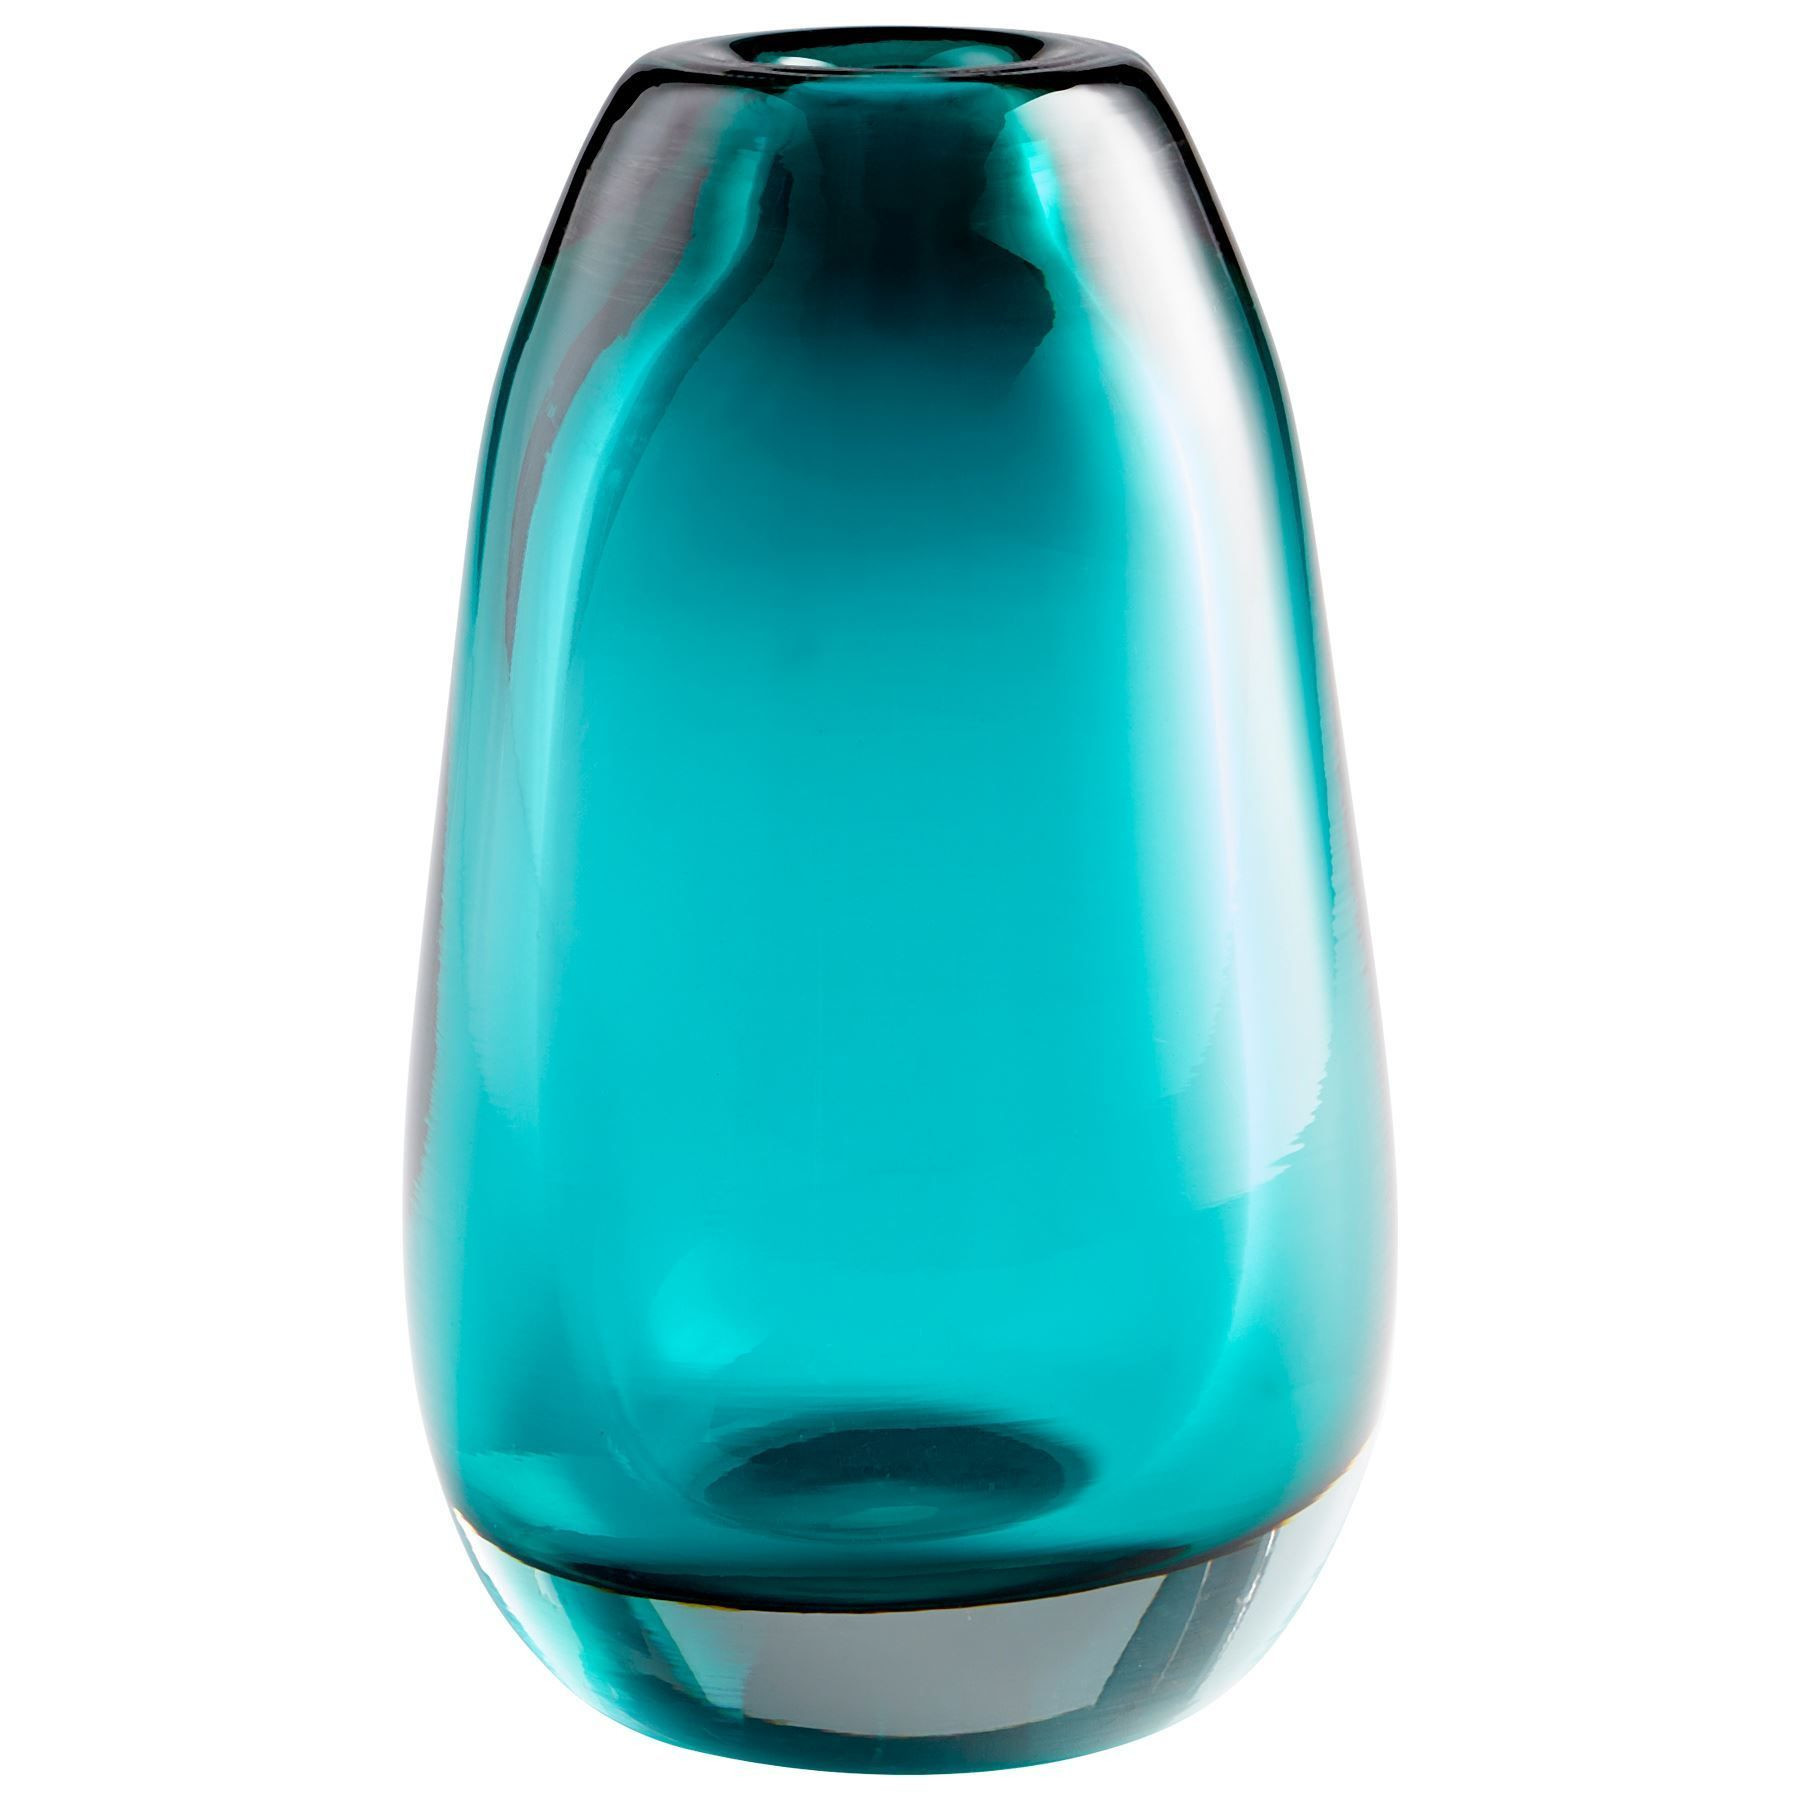 22 Awesome Cyan Design Vases 2024 free download cyan design vases of 7 pasabahce globe blue glass vase 12 3 cm flower and within blown ocean small cerulean blue art glass vase by cyan design